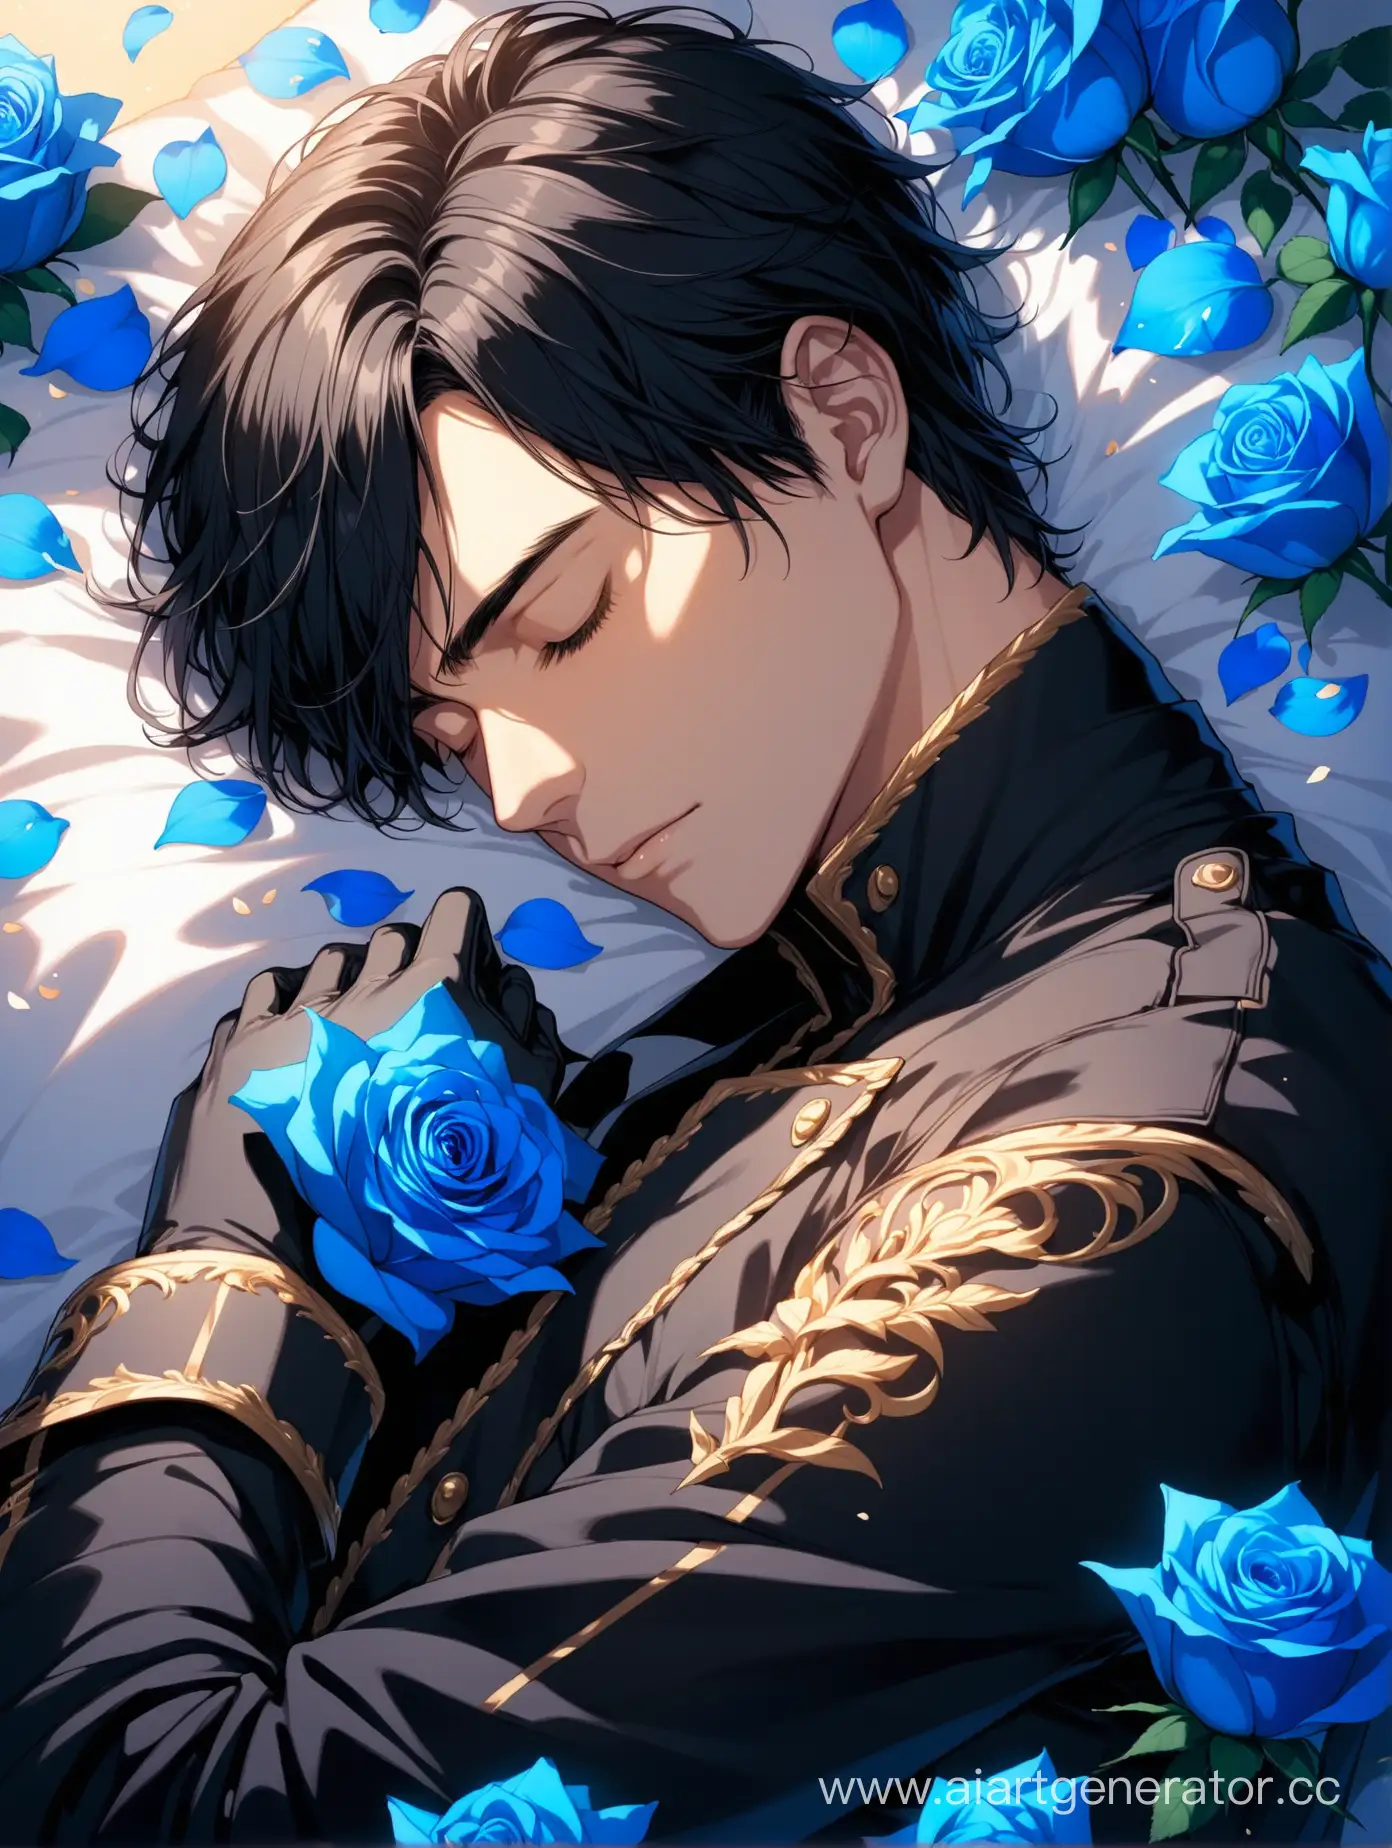 Solemn-Sleeping-Boy-Surrounded-by-Blue-Roses